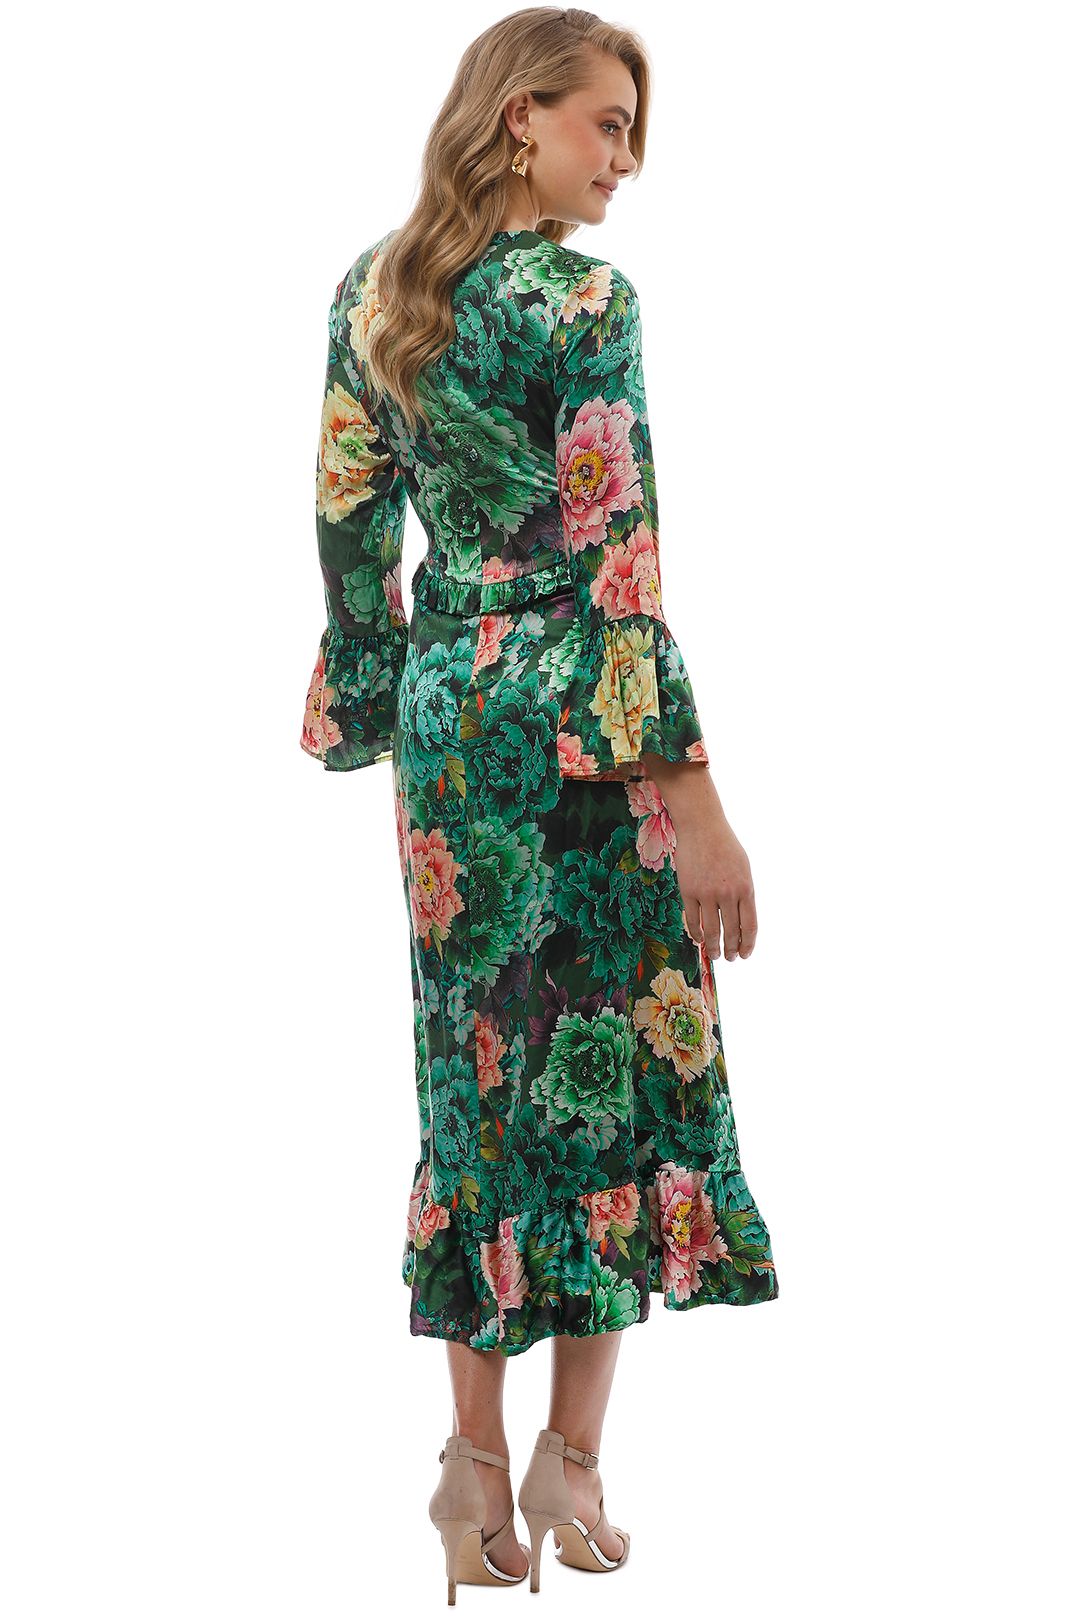 Trelise Cooper - Kill Them With Kindness Dress - Green Floral - Back